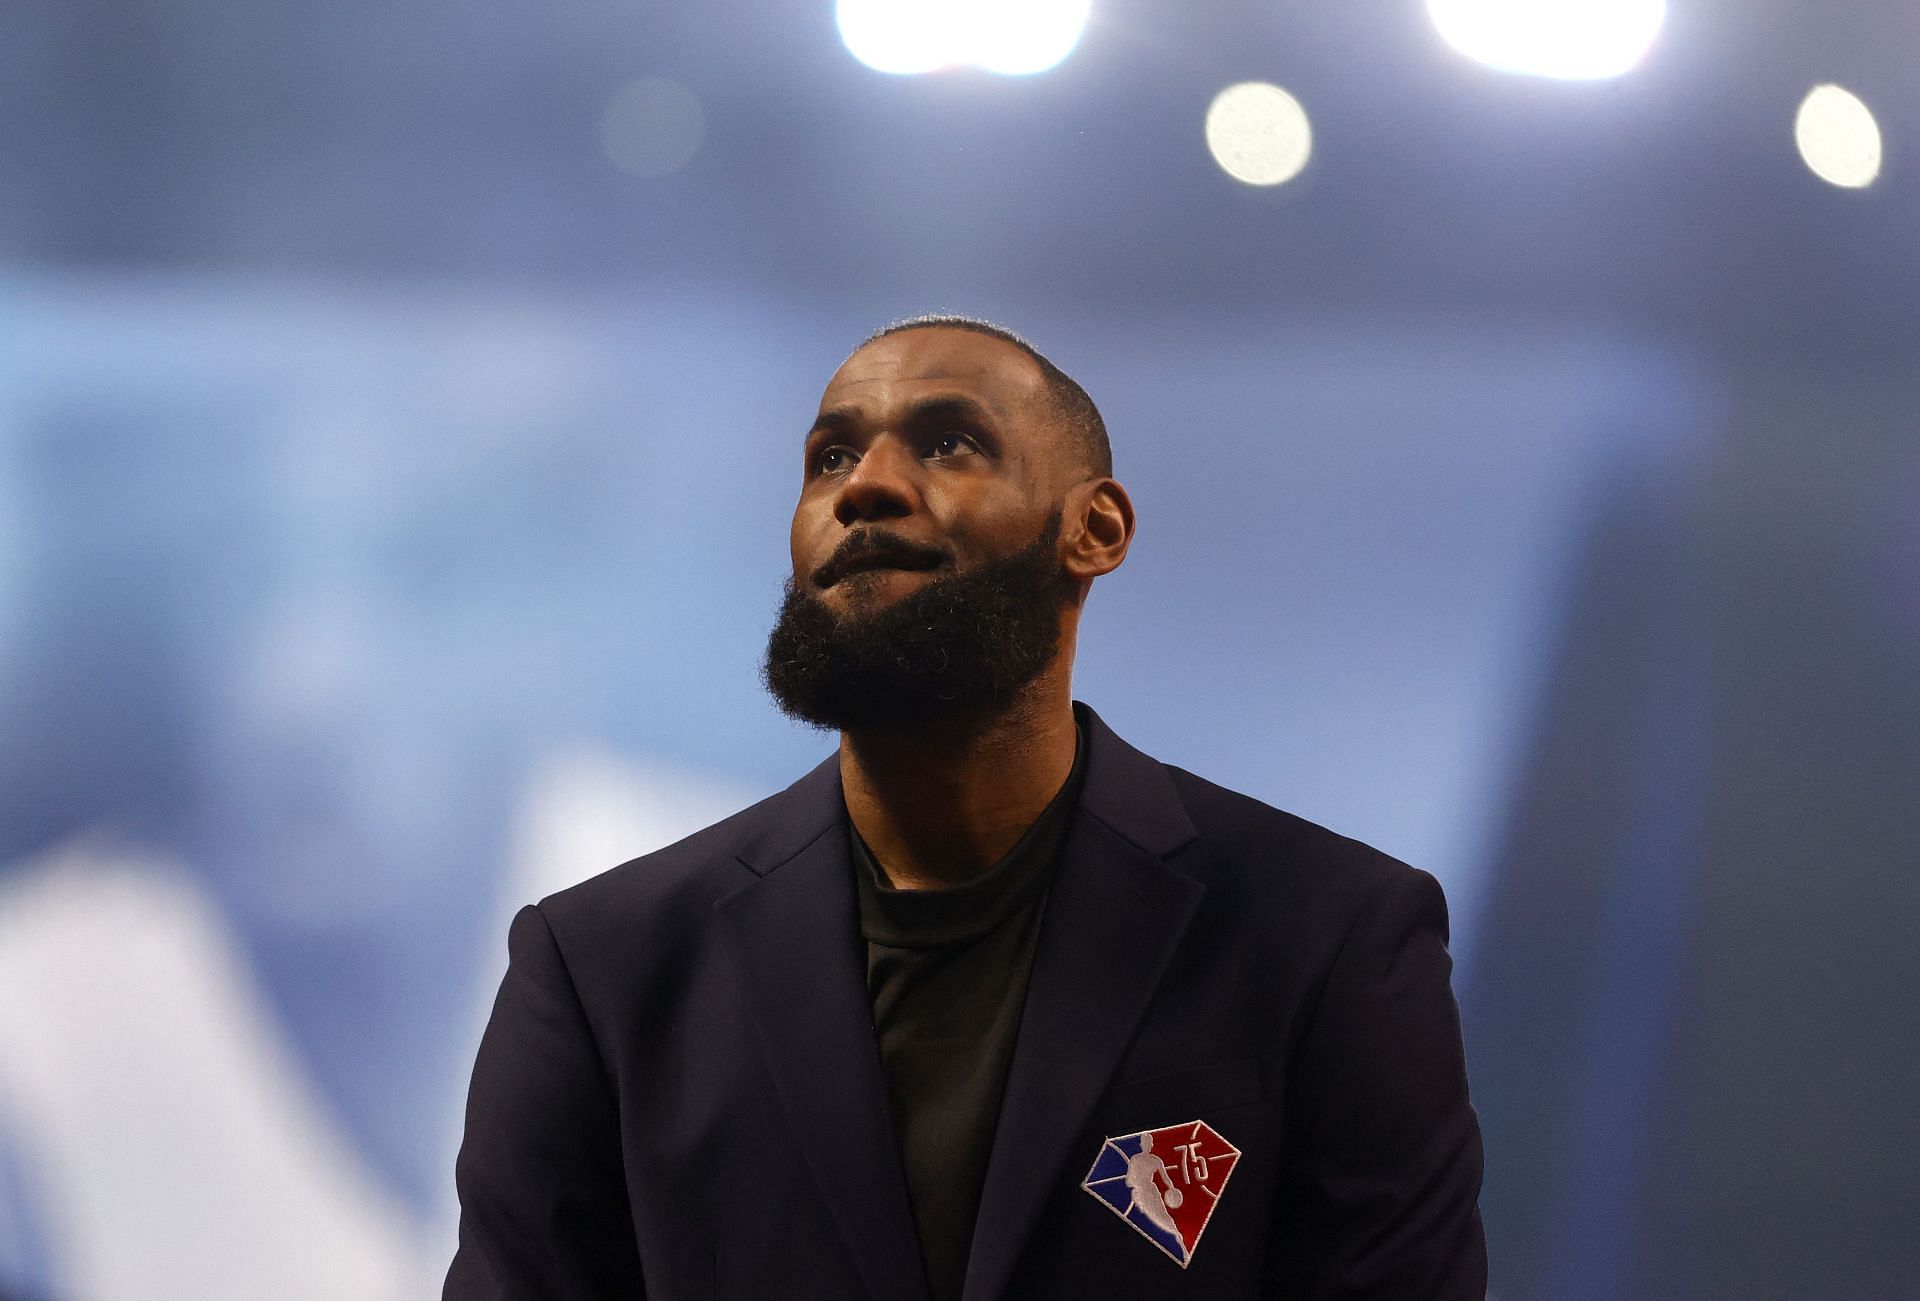 LeBron James during the NBA All-Star Weekend